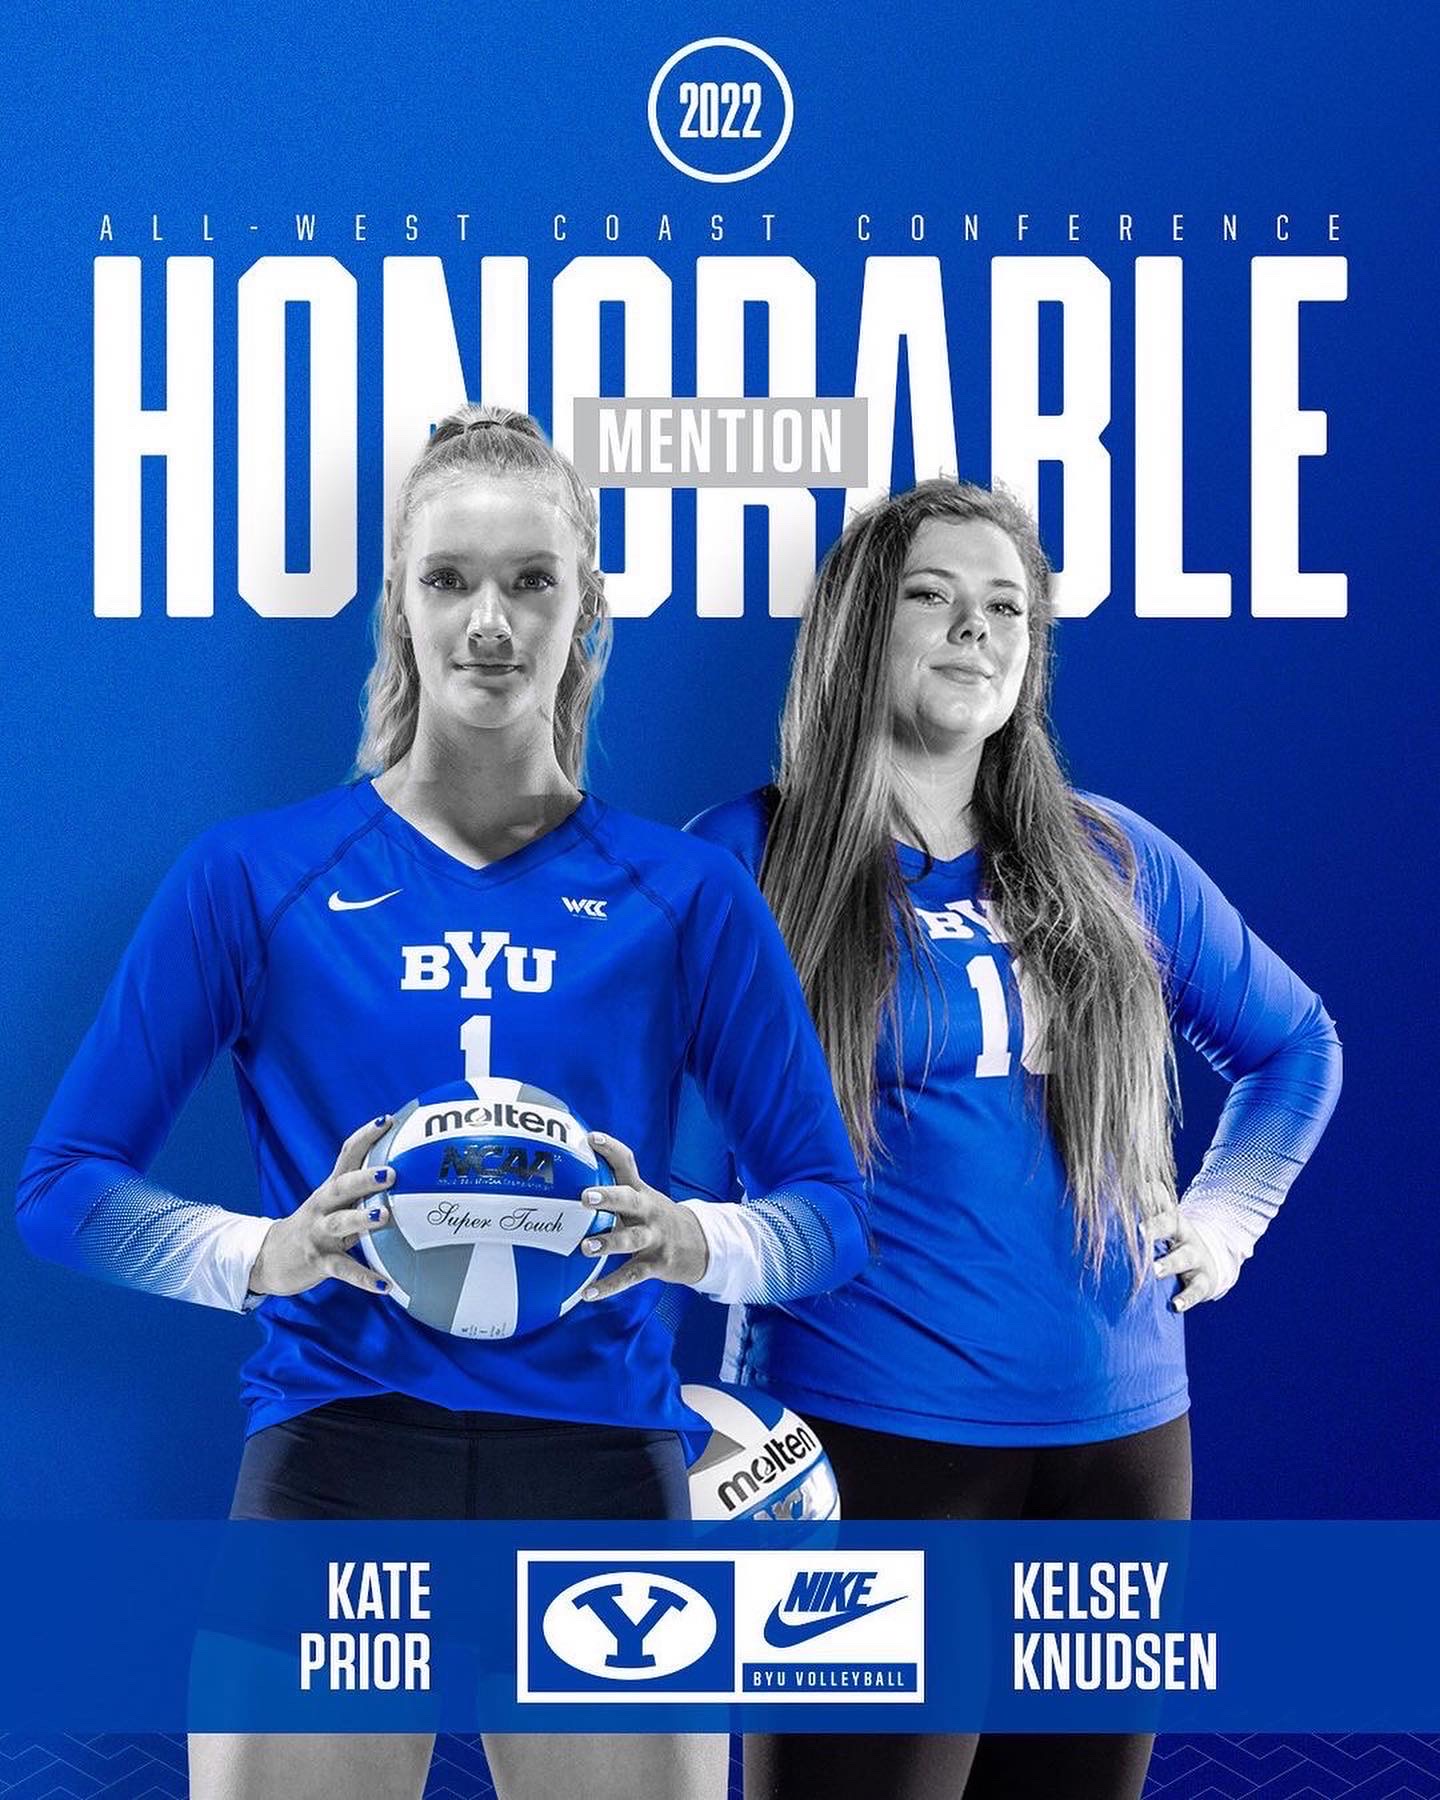 Kate Prior honorable mention All West Coast Conference BYU freshman former coach April Chapple private volleyball client for 3 years.